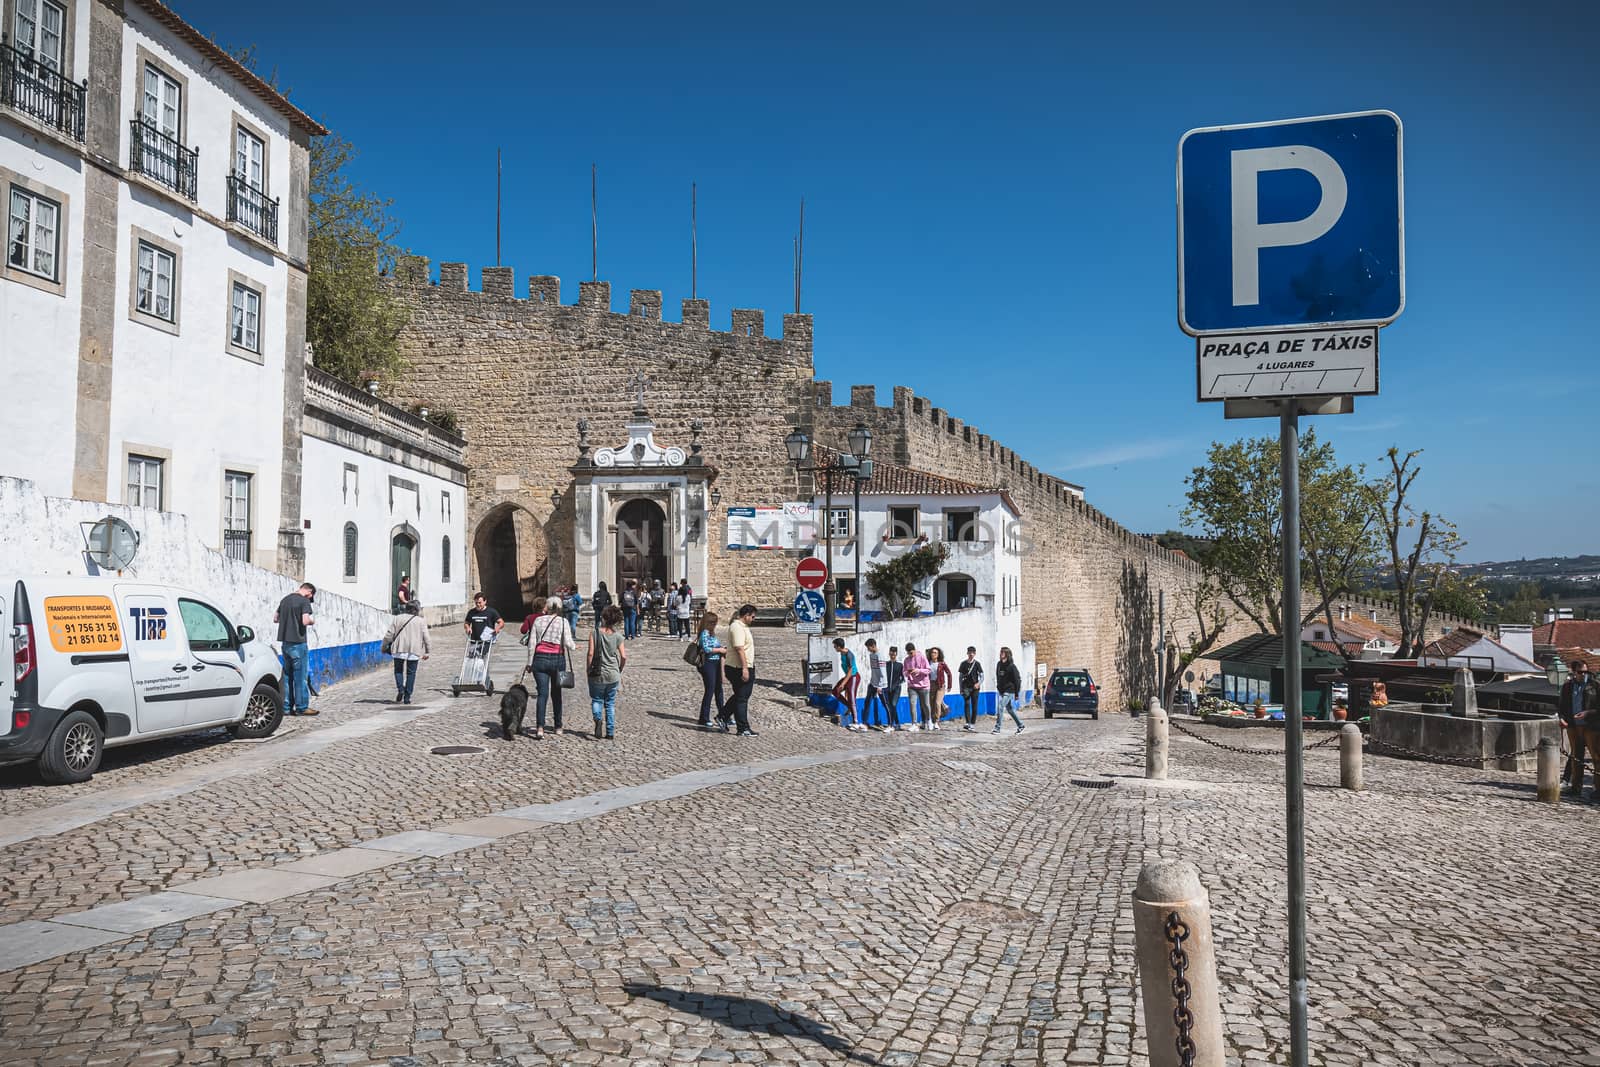 Obidos, Portugal - April 12, 2019: Tourists walking towards the entrance gate of the historic city on a spring day